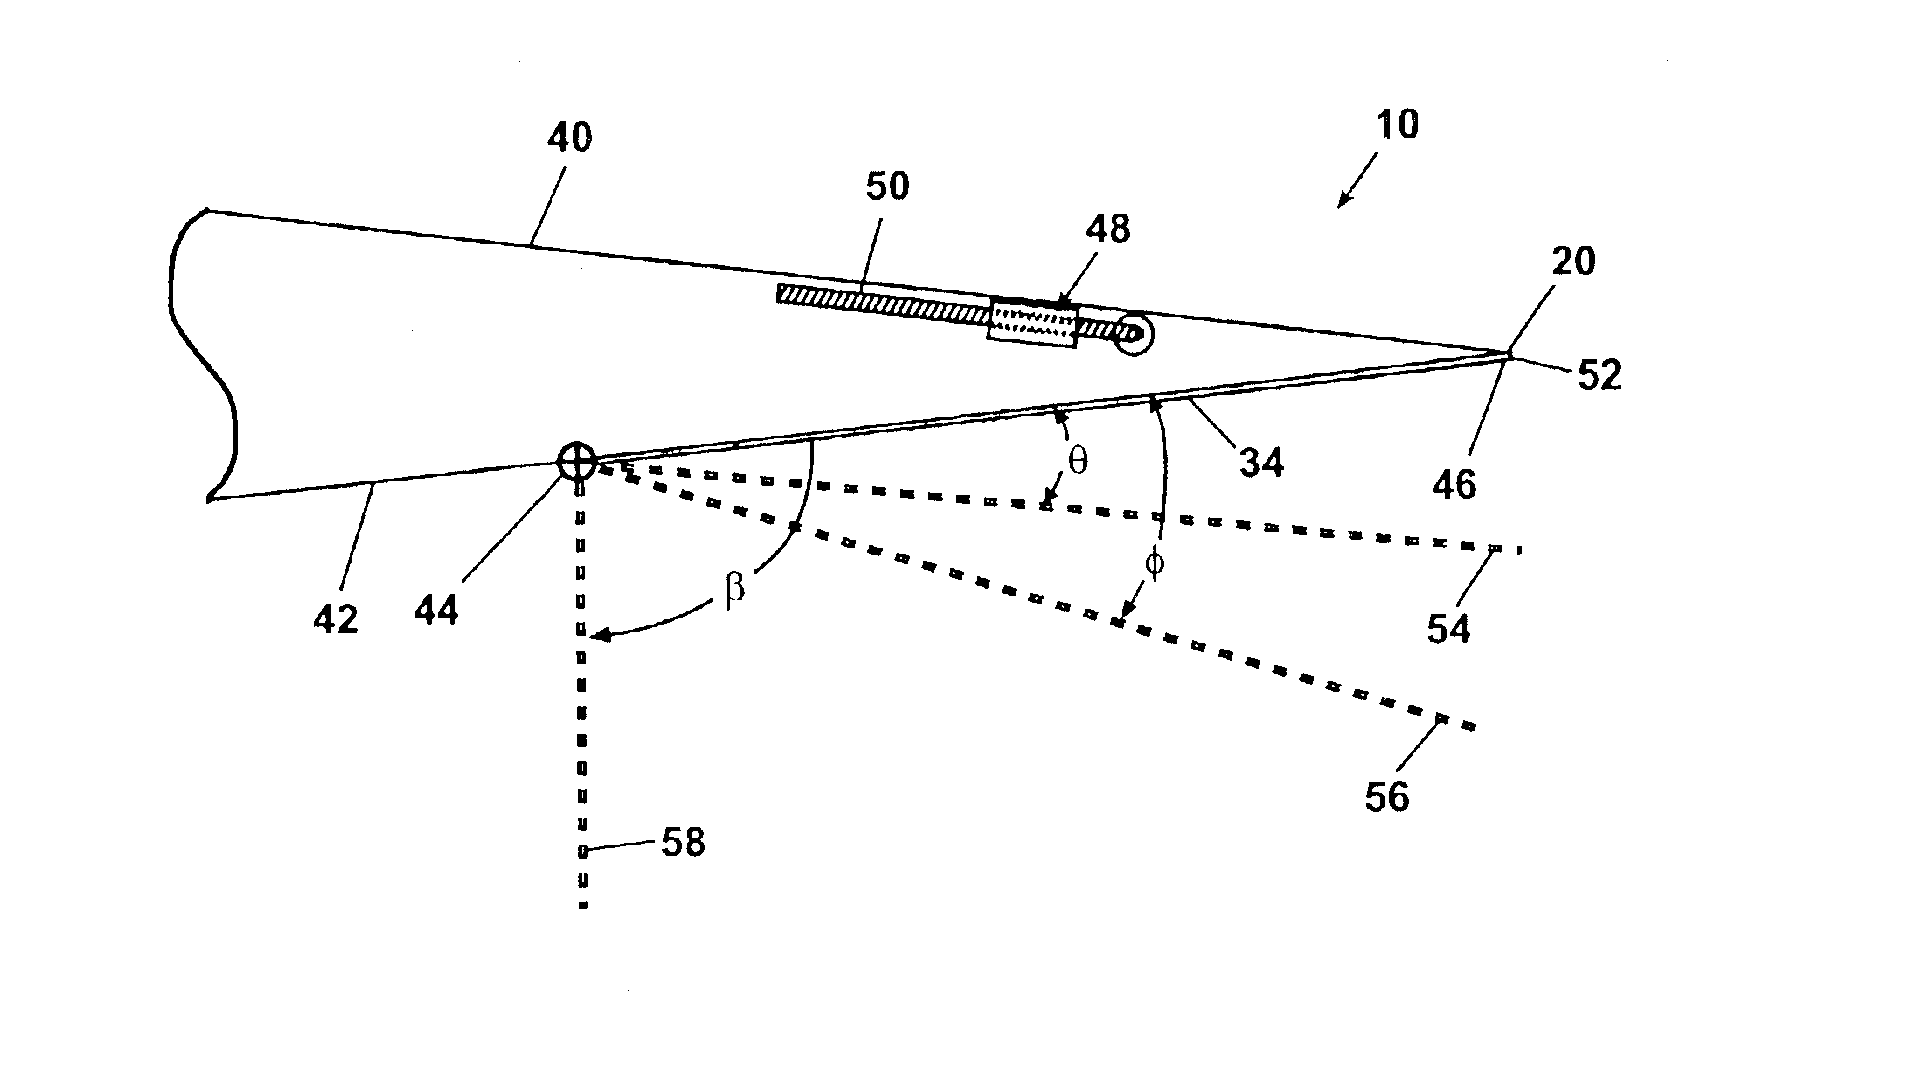 Variable trailing edge geometry and spanload control